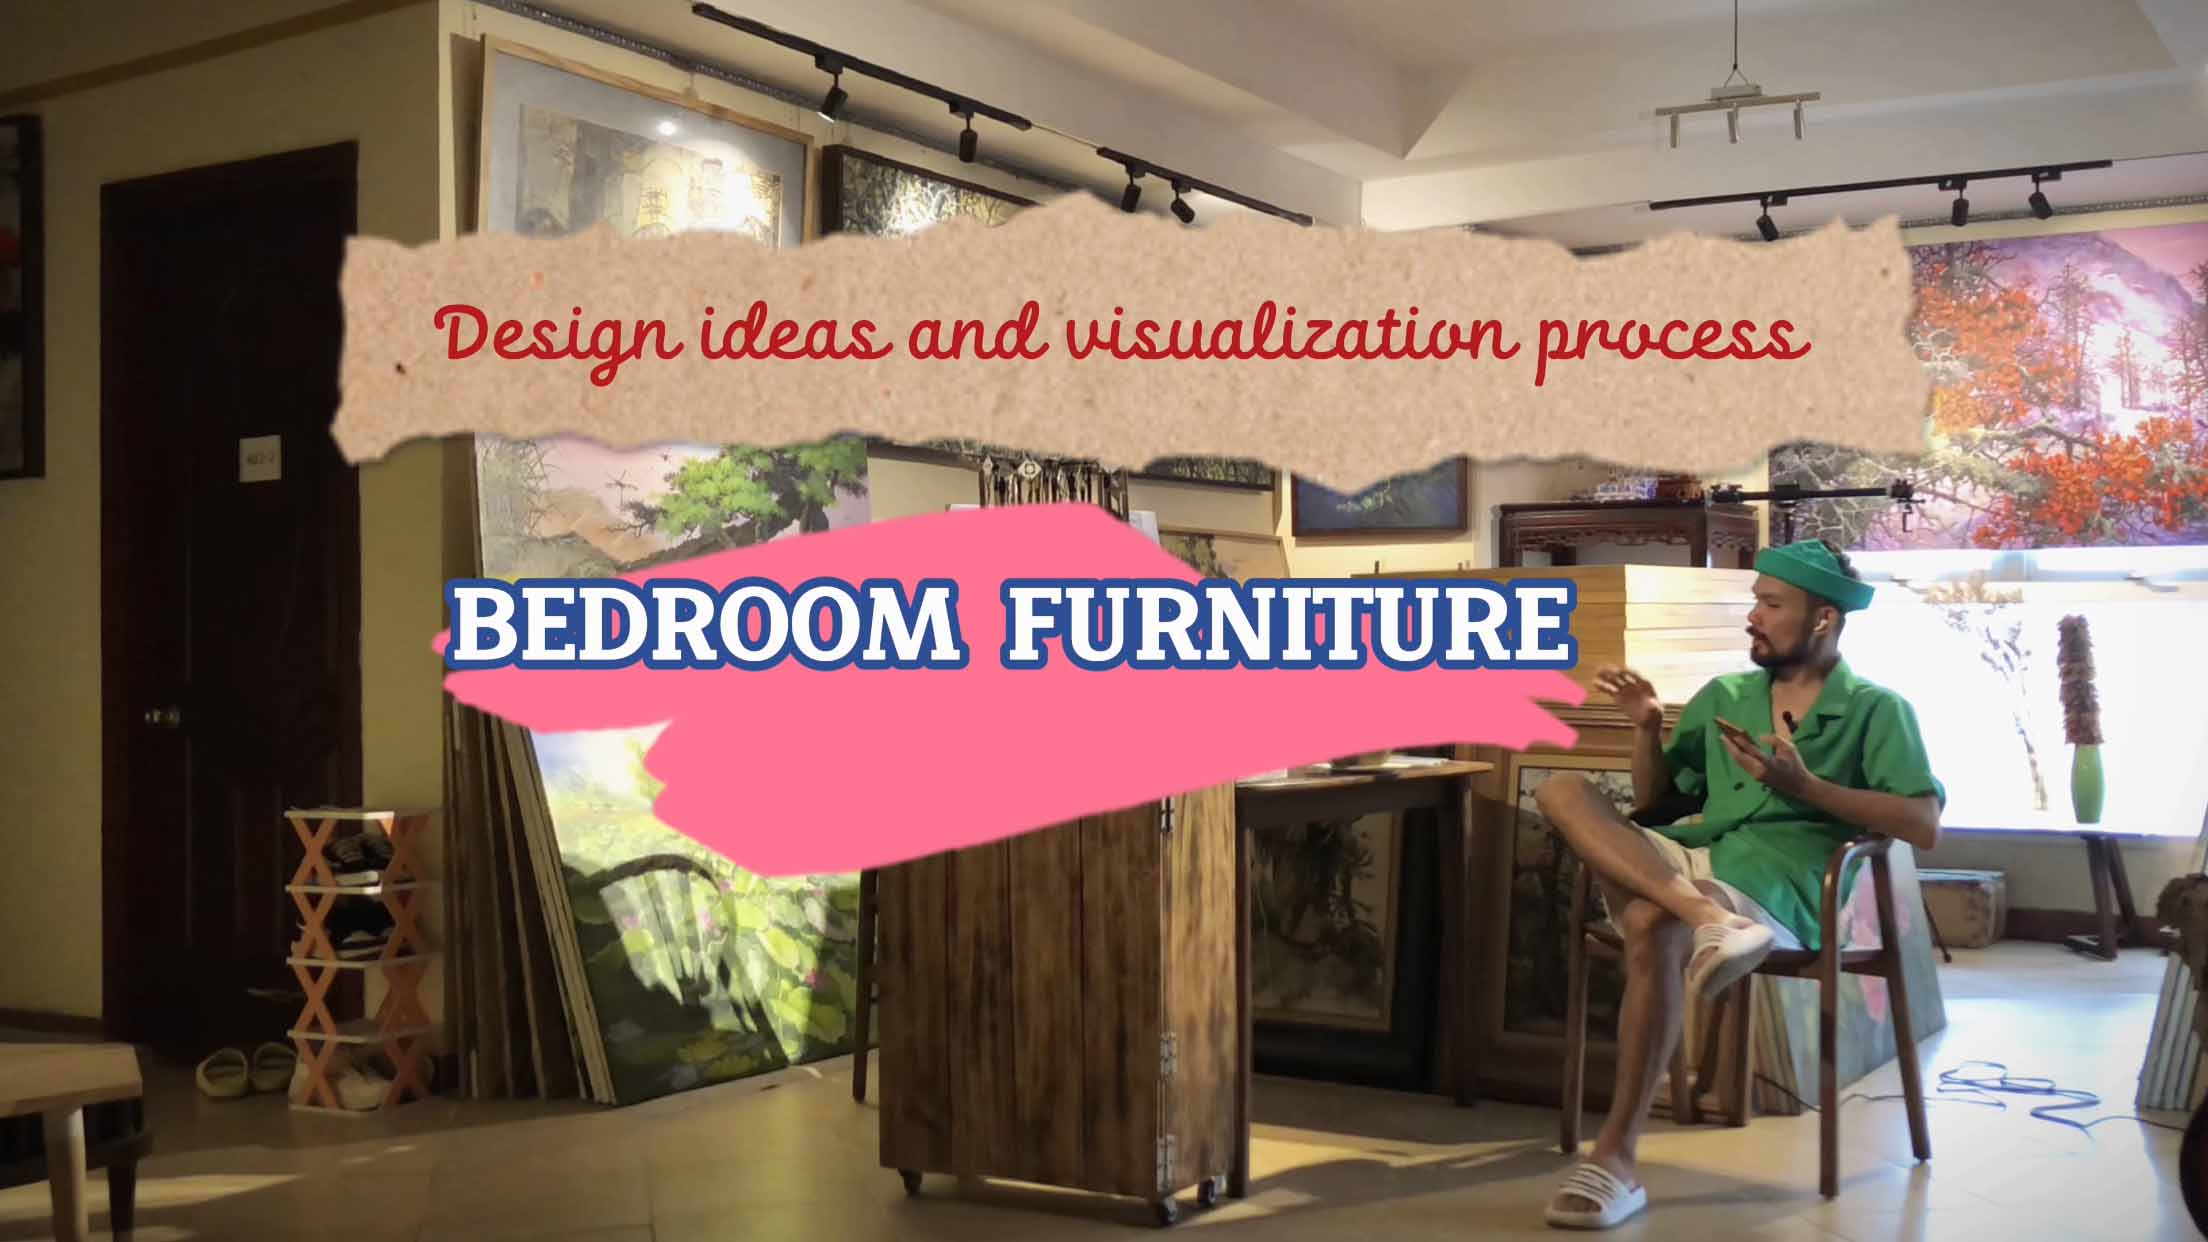 Design ideas and visualization process Bedroom Furniture 2